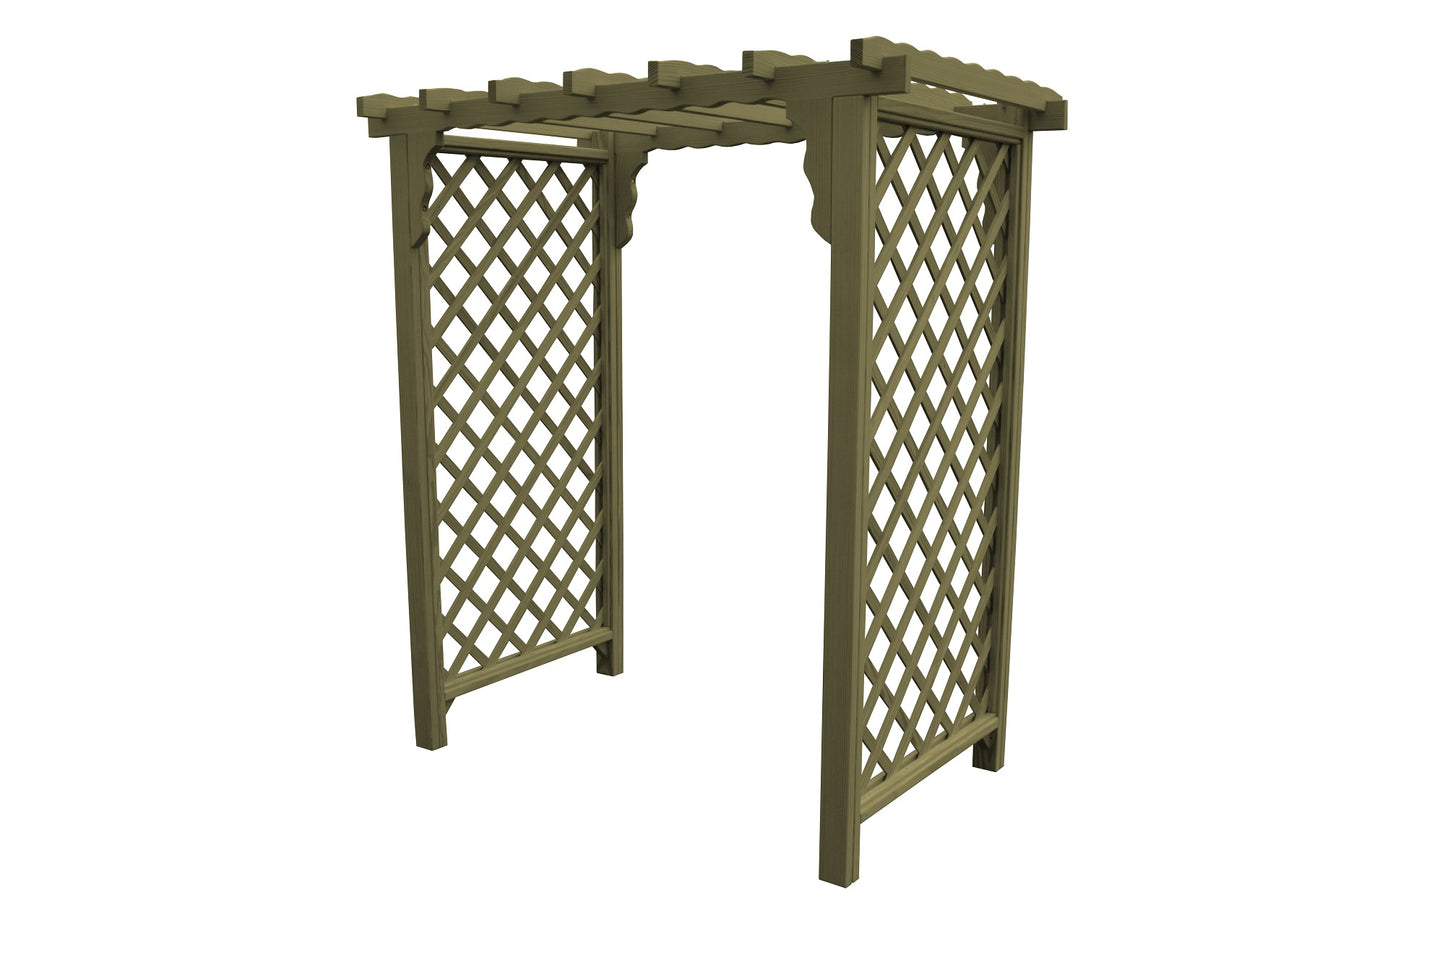 A&L FURNITURE CO. 6' Covington Pressure Treated Pine Arbor - LEAD TIME TO SHIP 10 BUSINESS DAYS